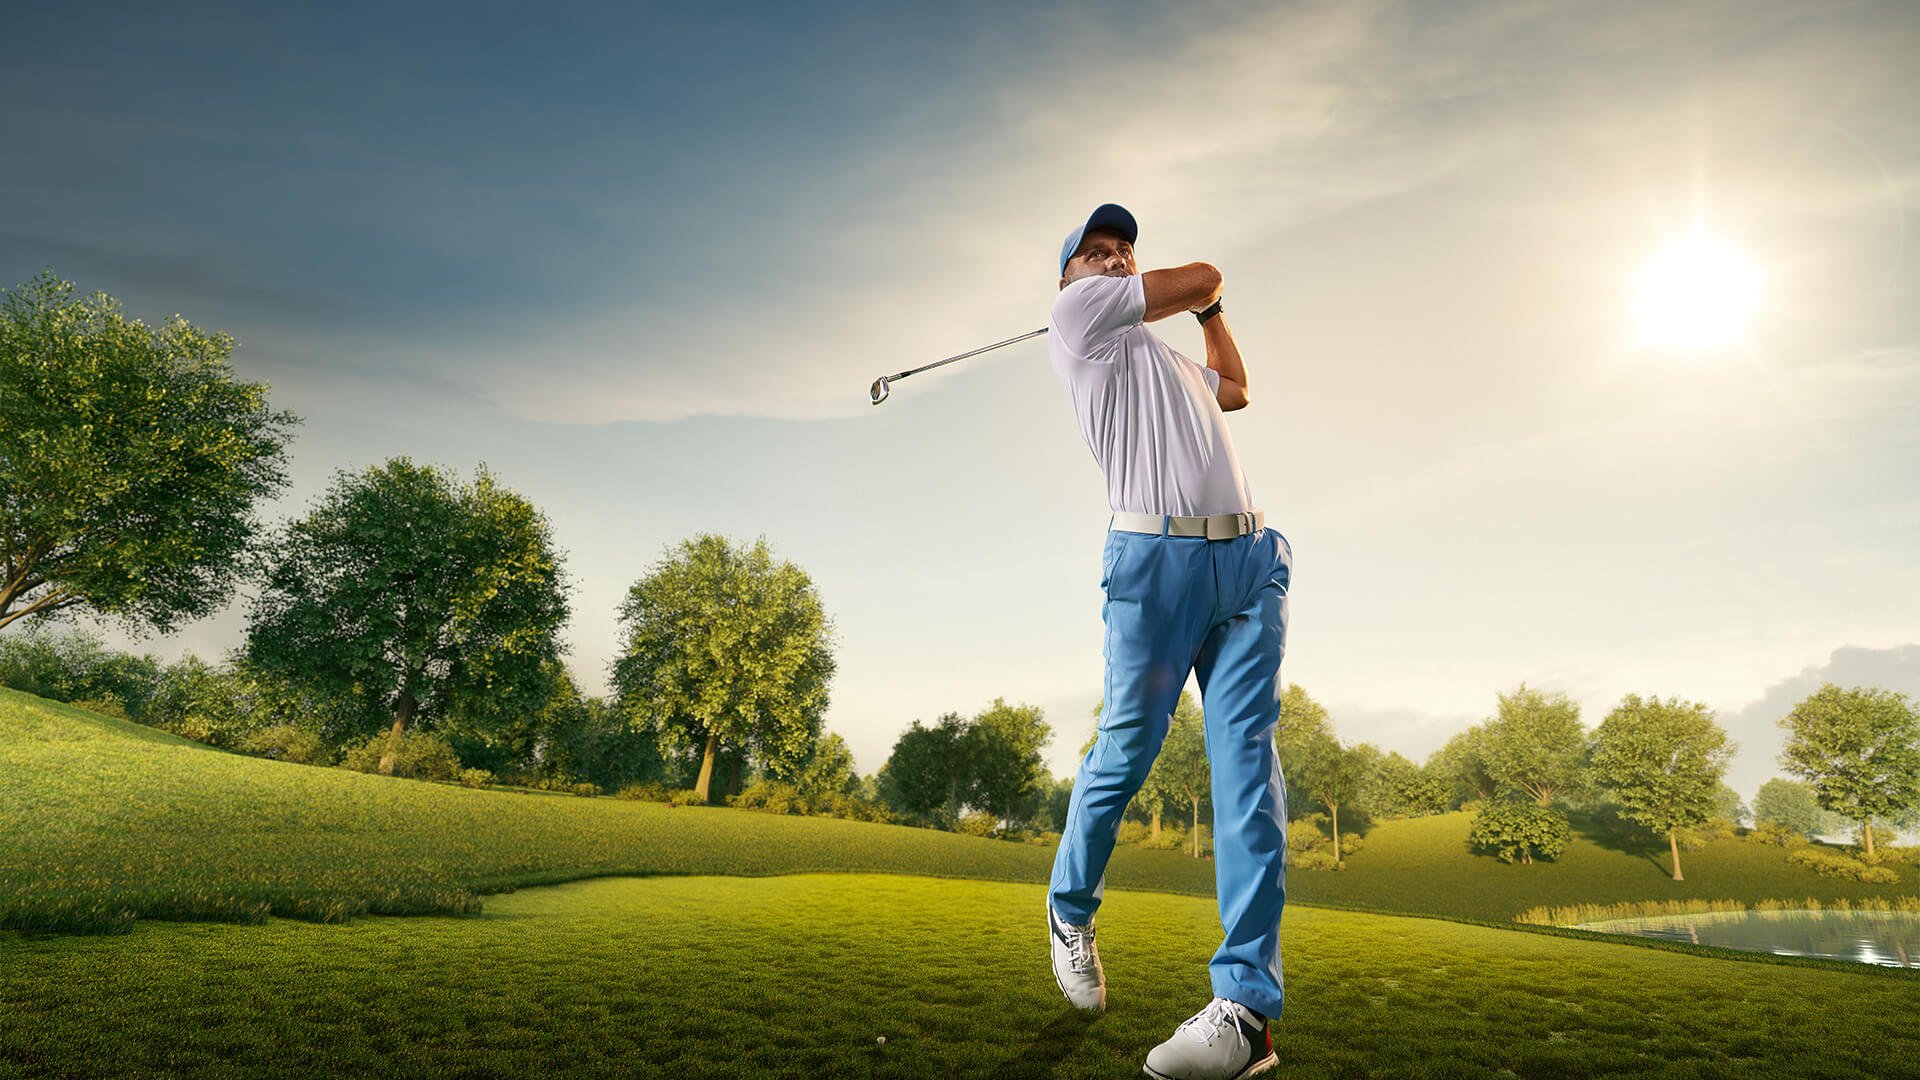 How to Make the Most Out of Your Golf Lesson